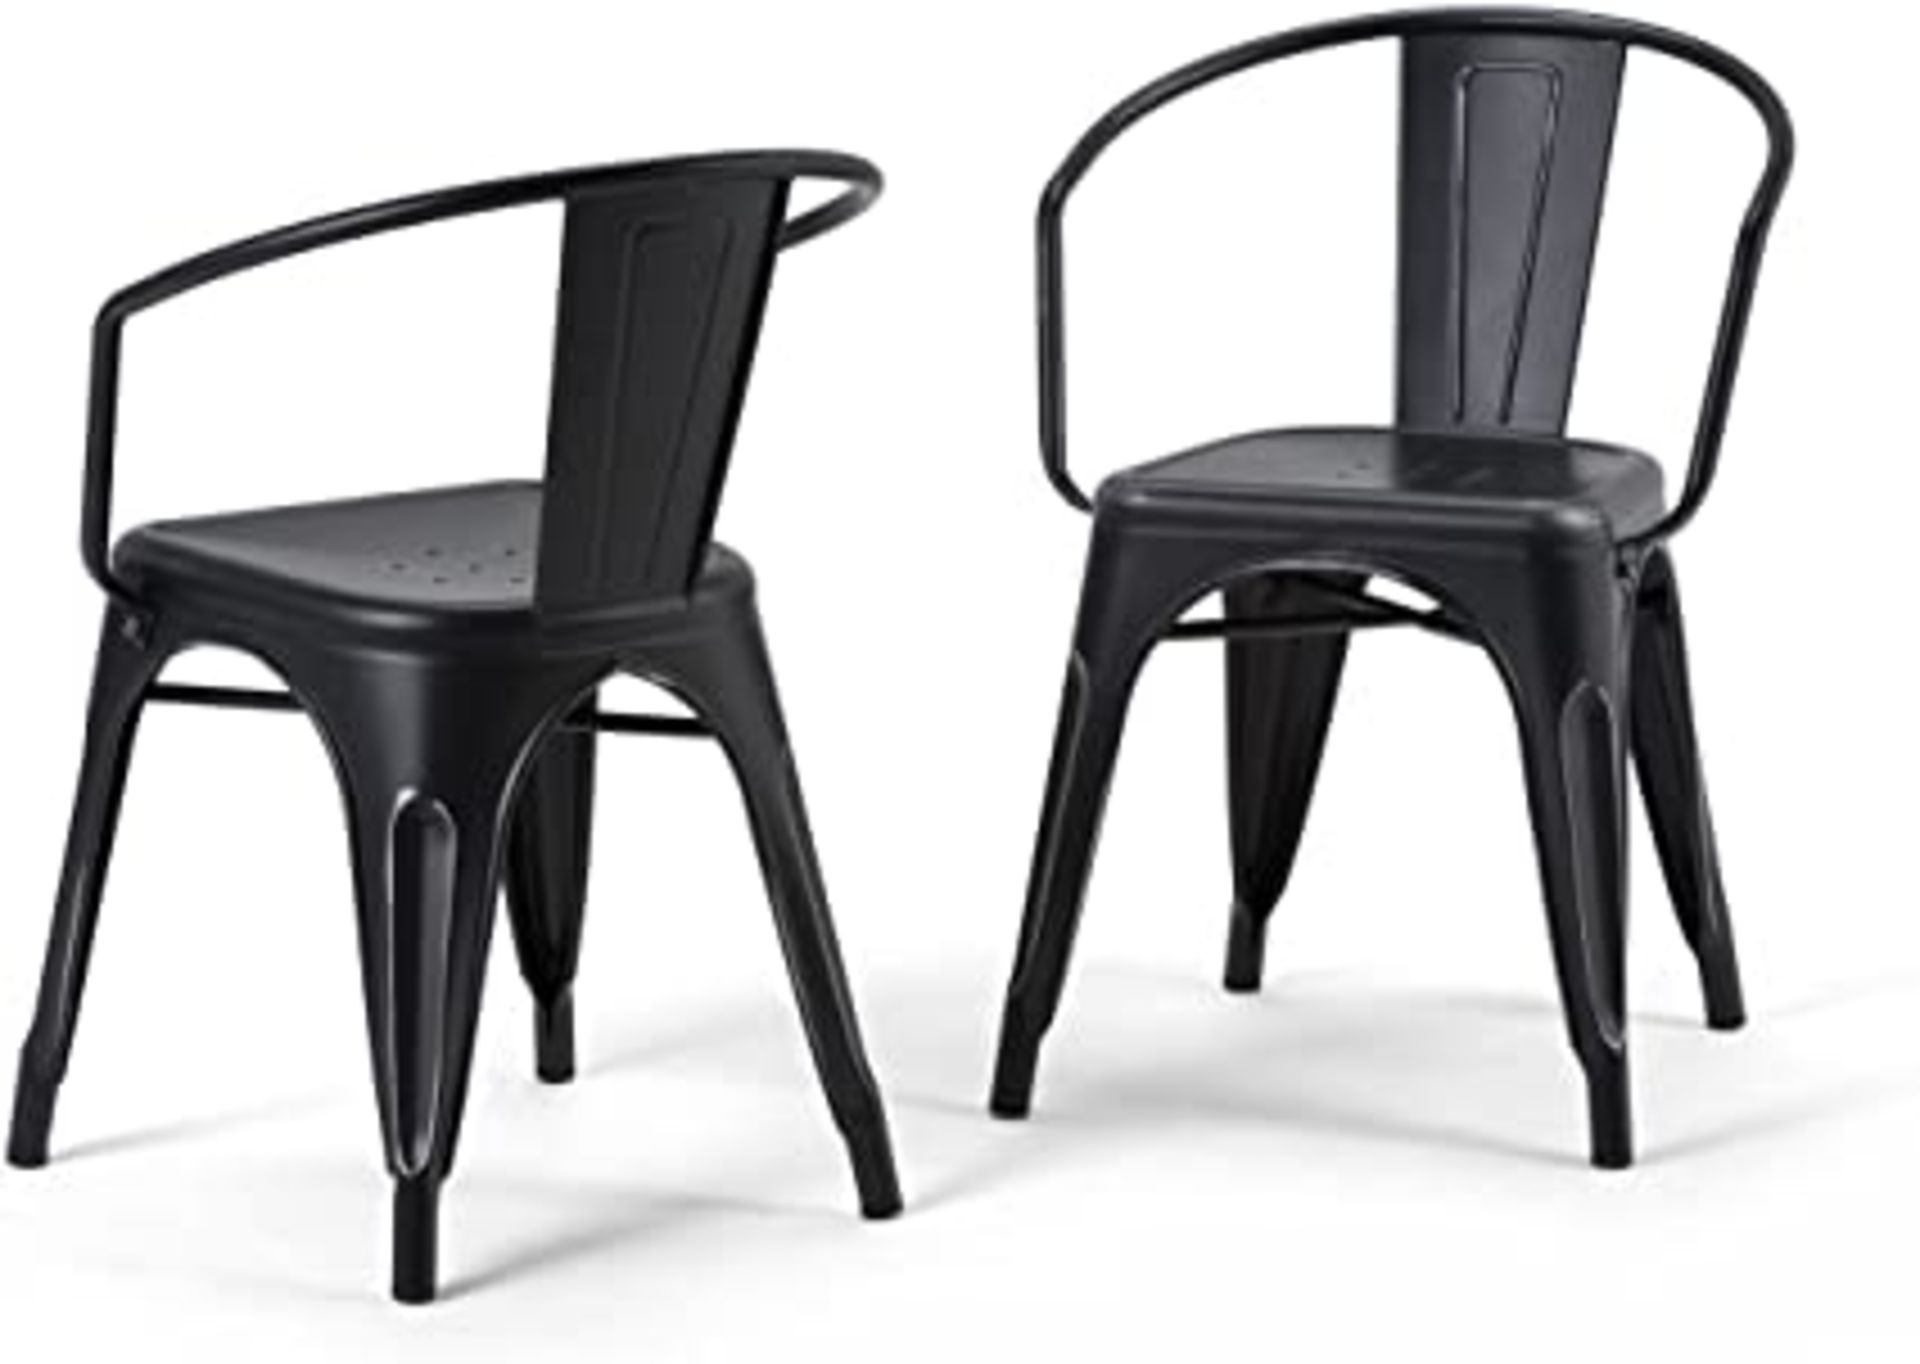 1 x Tolix Industrial Style Outdoor Bistro Table and Chair Set in Black - Includes 1 x Table and 4 - Image 2 of 7